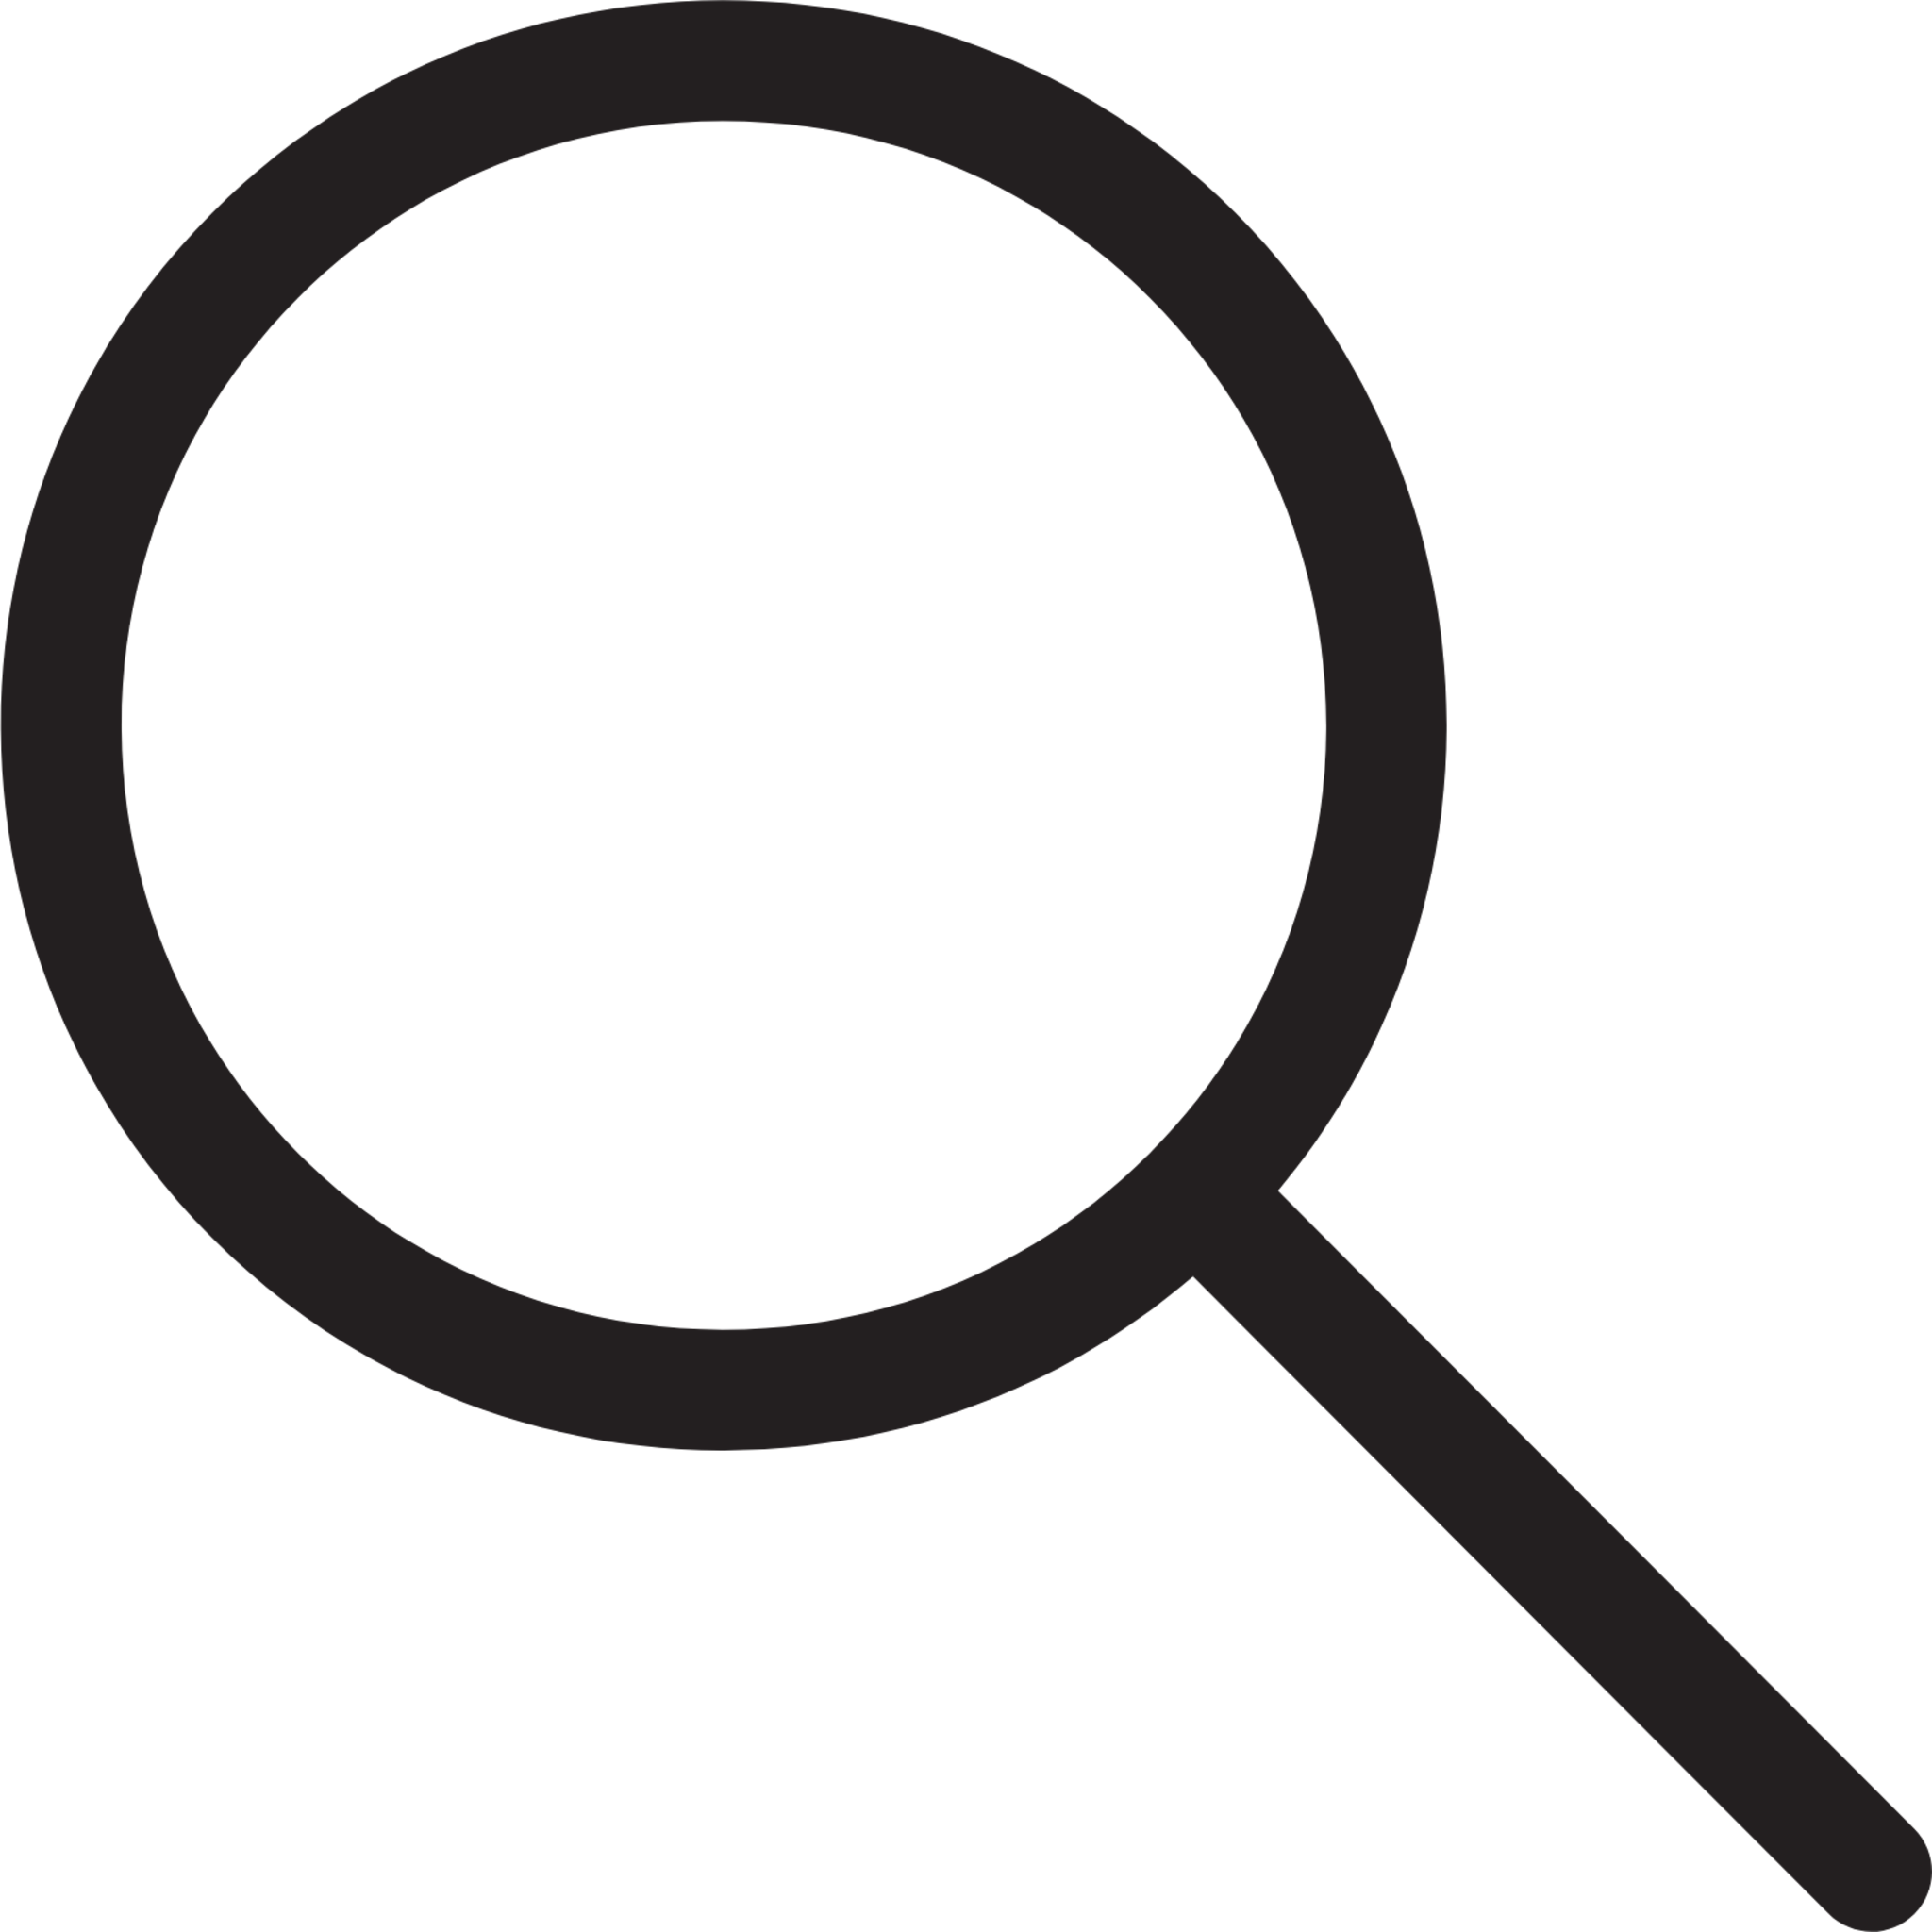 magnifying glass image png